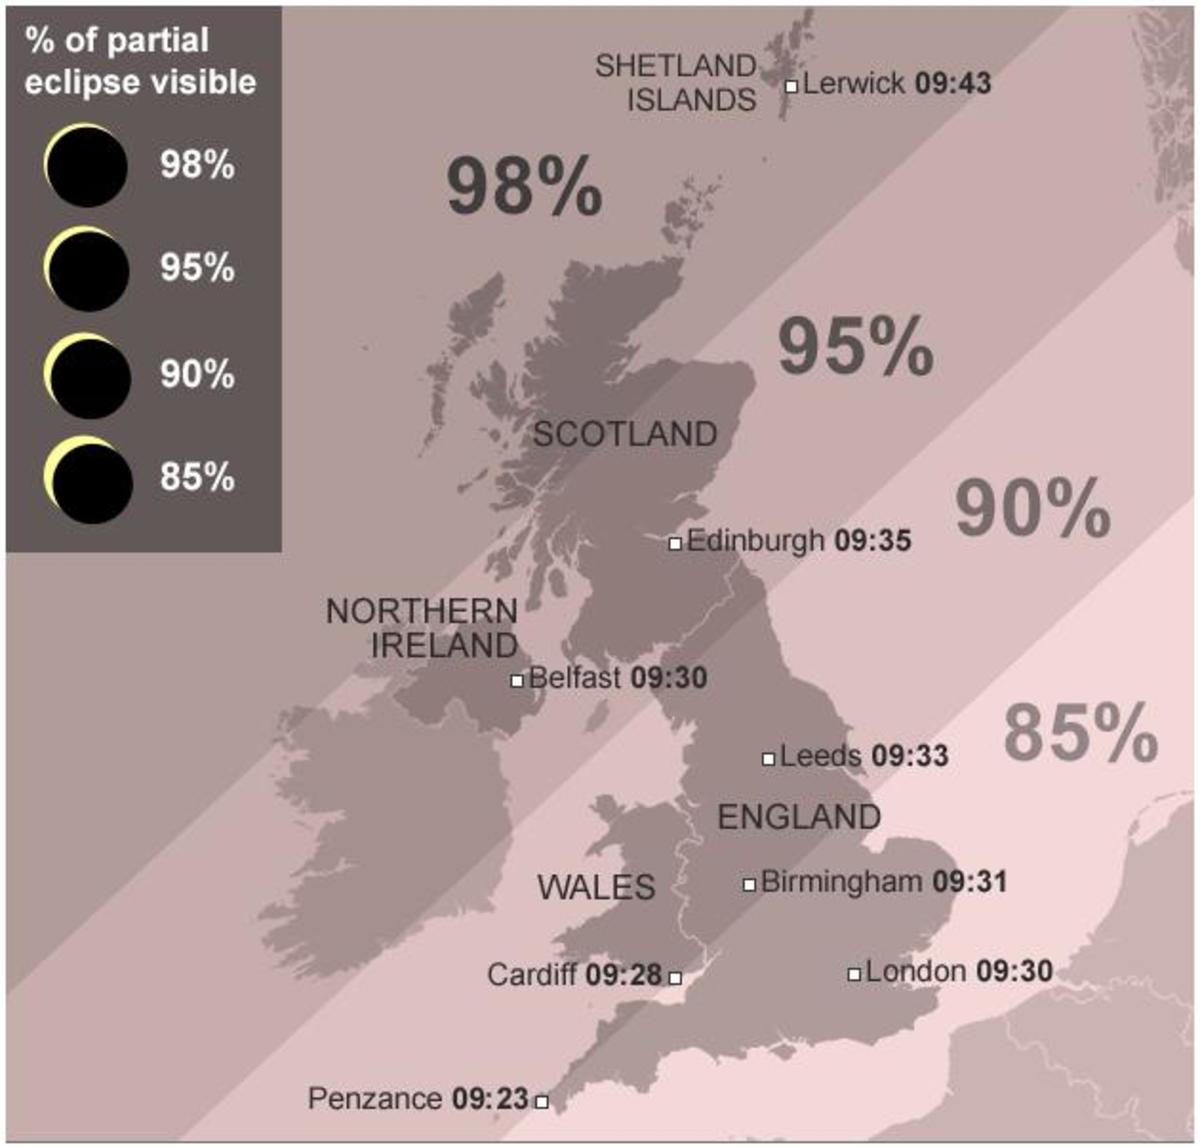 The map shows the percentage of the partial eclipse that was seen over Britain & Ireland